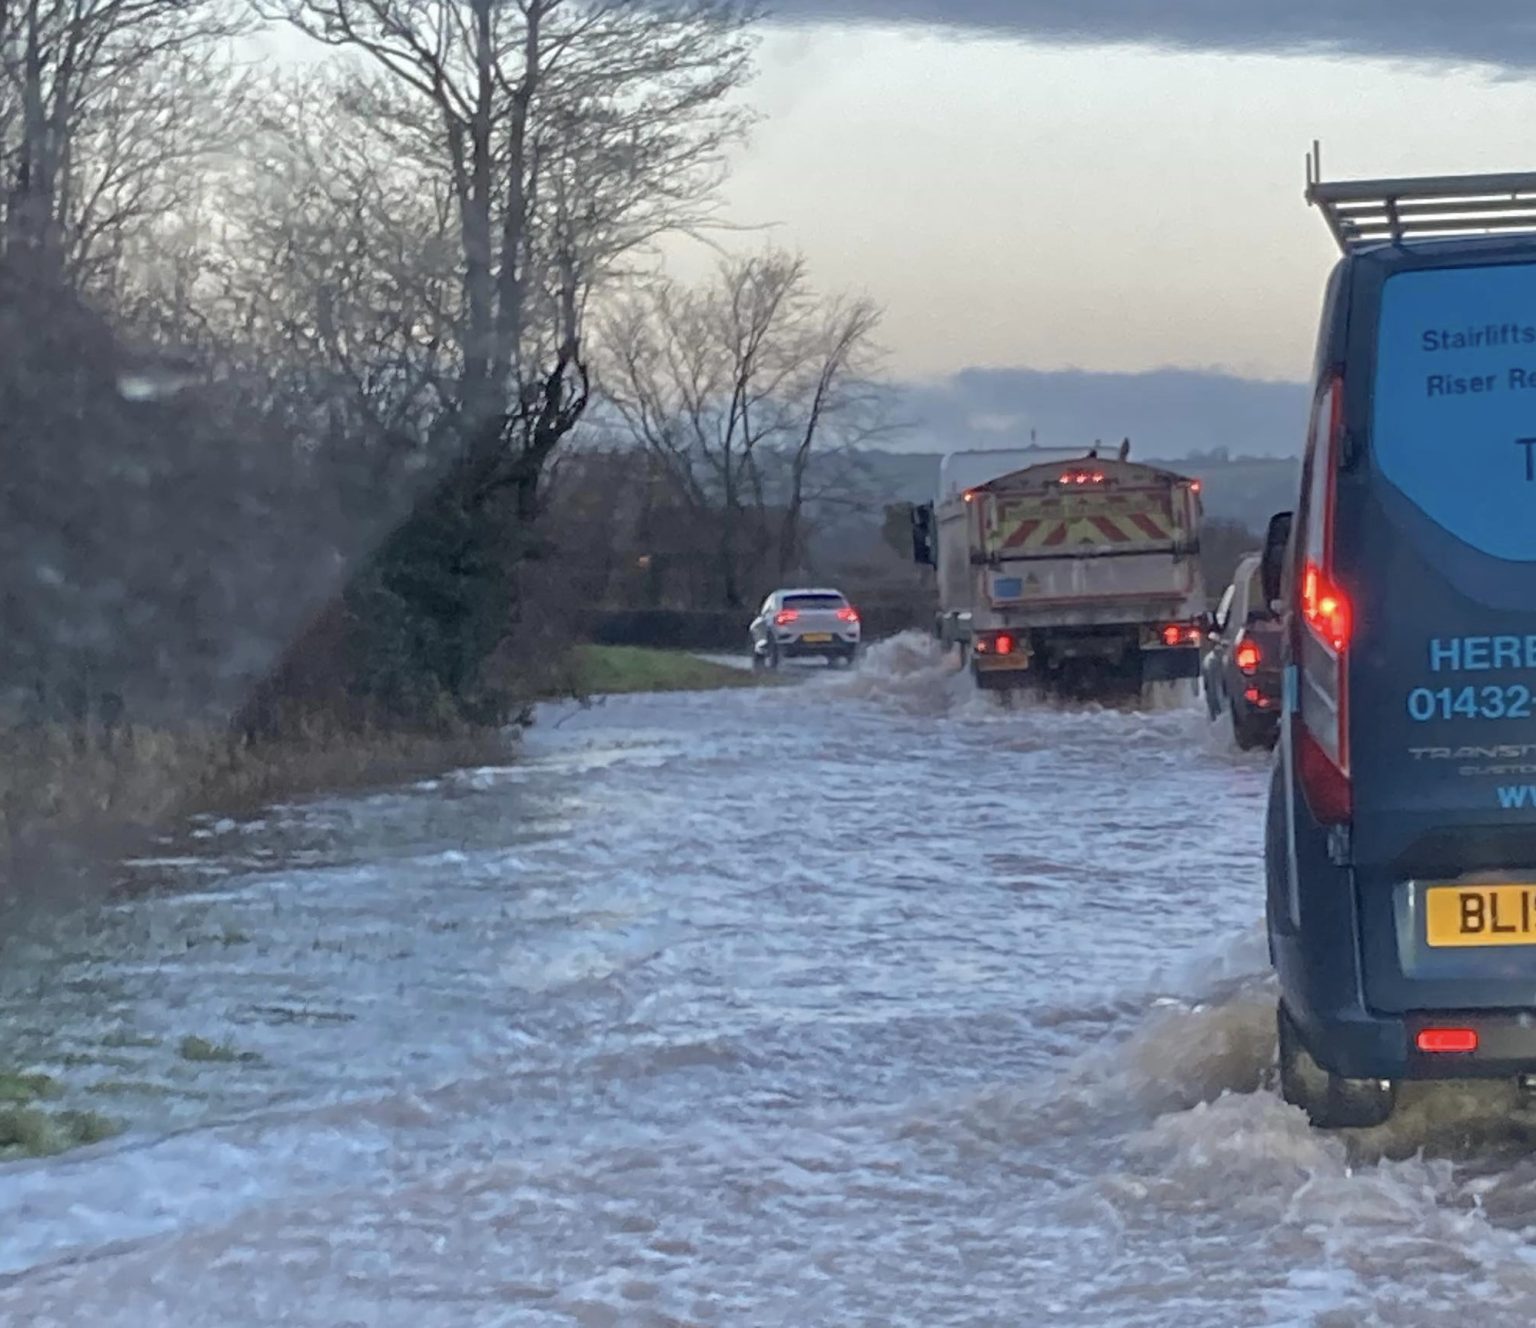 NEWS | Flood Warning issued on the River Wye between Hay-on-Wye and Hereford with peak due on Monday